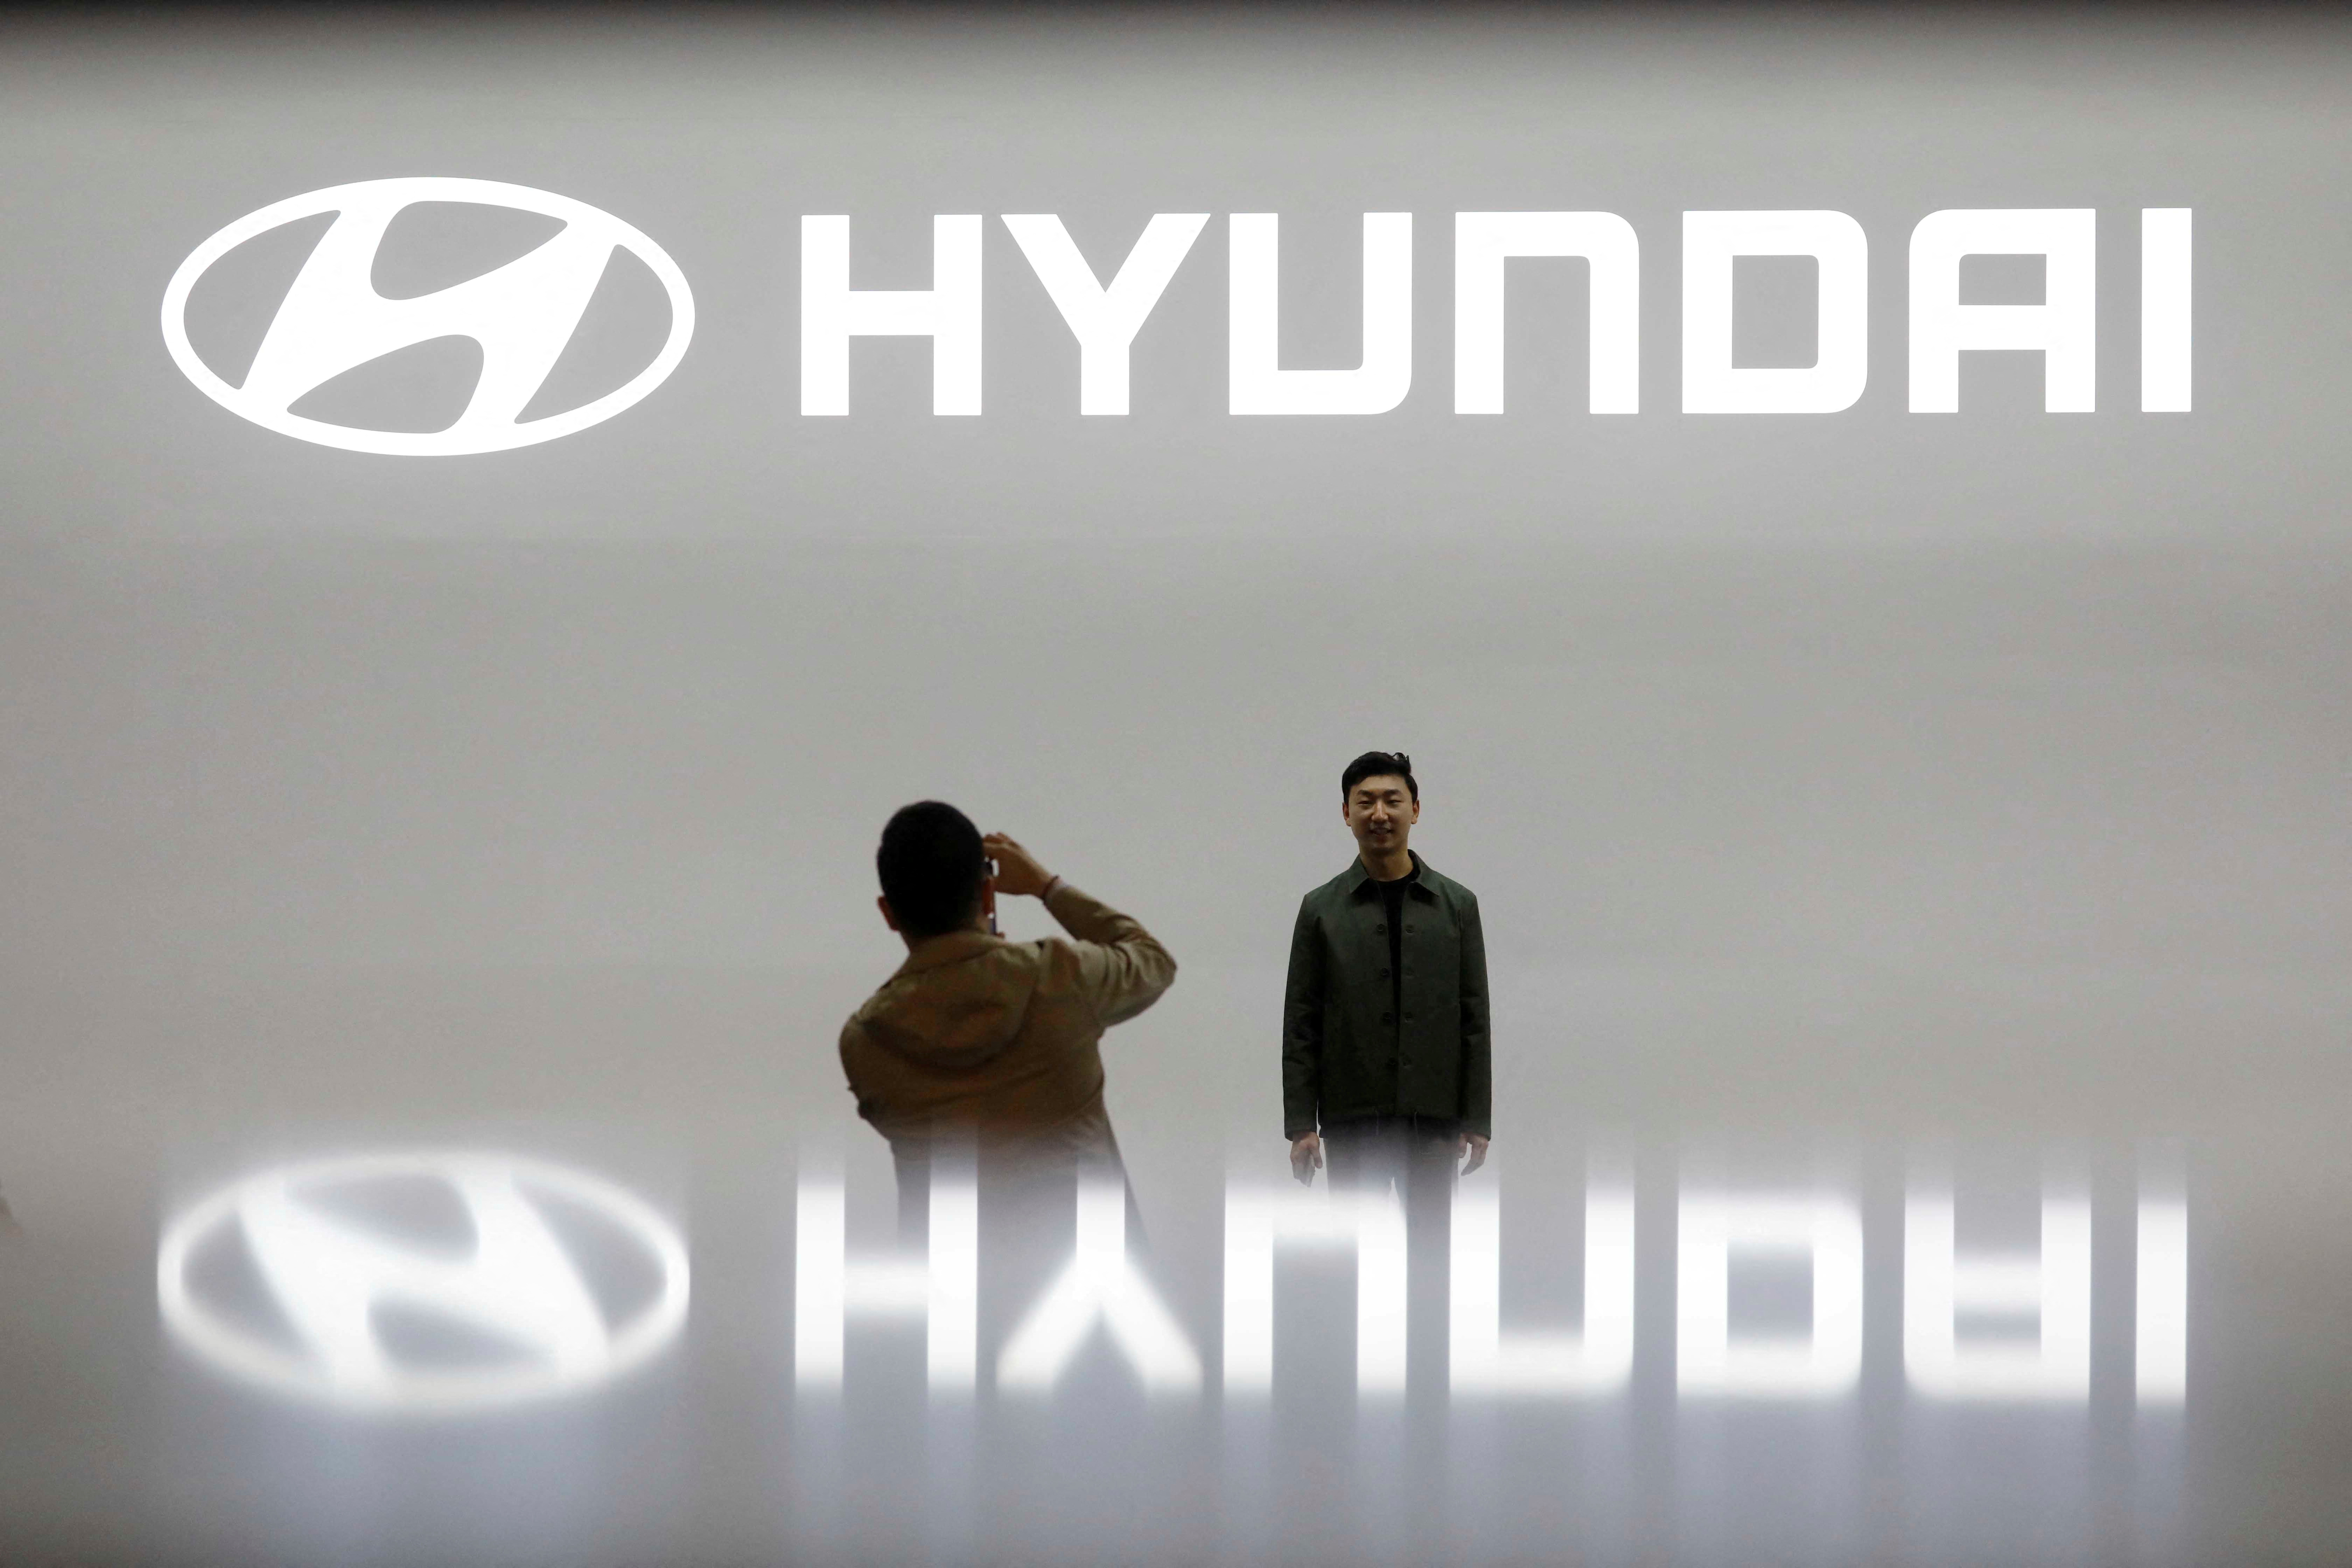 Visitors take photographs in front of the logo of Hyundai Motor during the 2019 Seoul Motor Show in Goyang